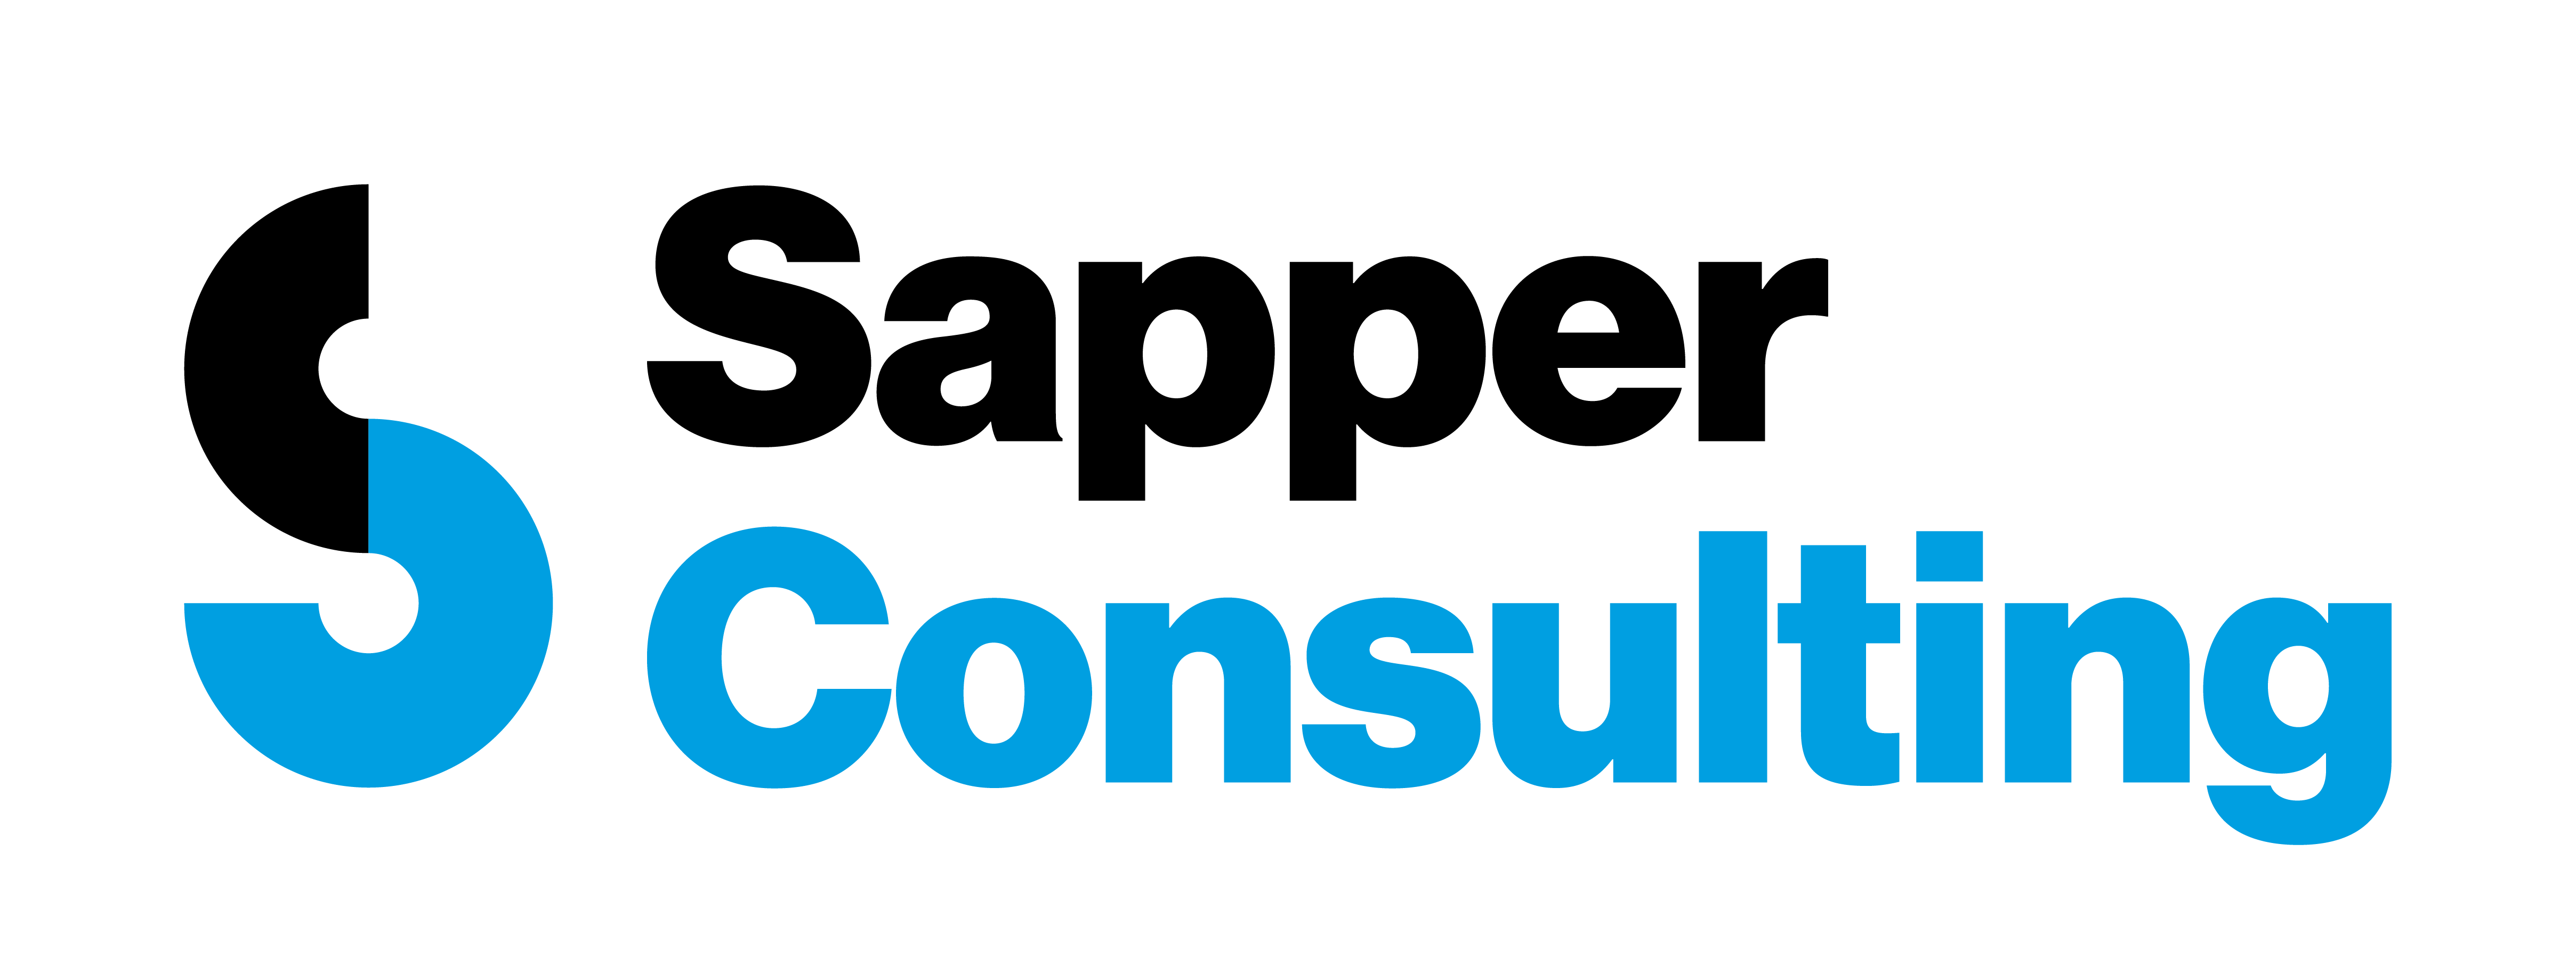 Sapper Consulting